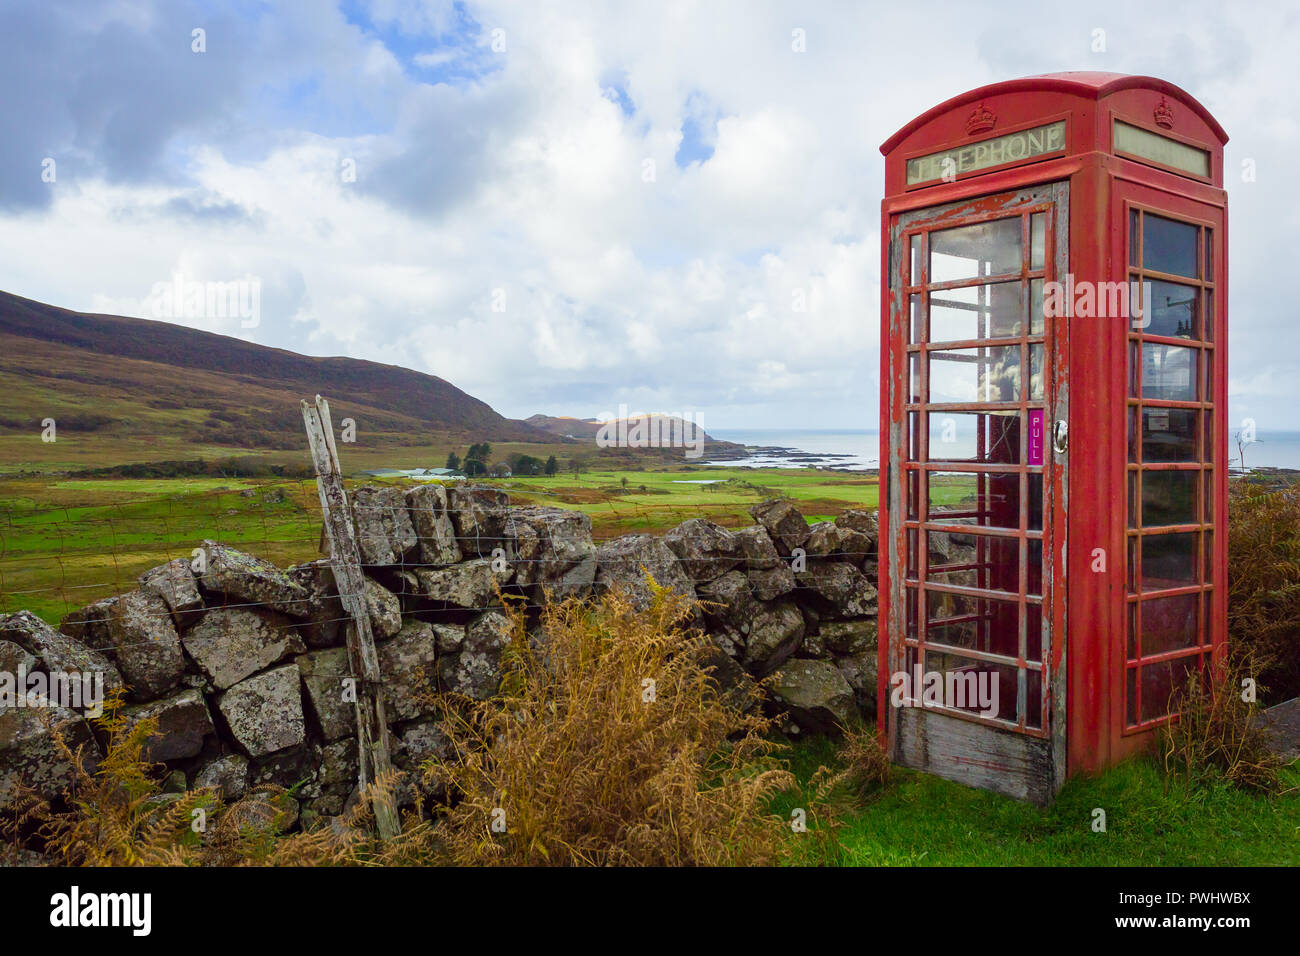 Old fashioned red telephone box, abandoned and defunct in a rural village in the Highlands of Scotland overlooking the Hebridean isle of Eigg. Stock Photo